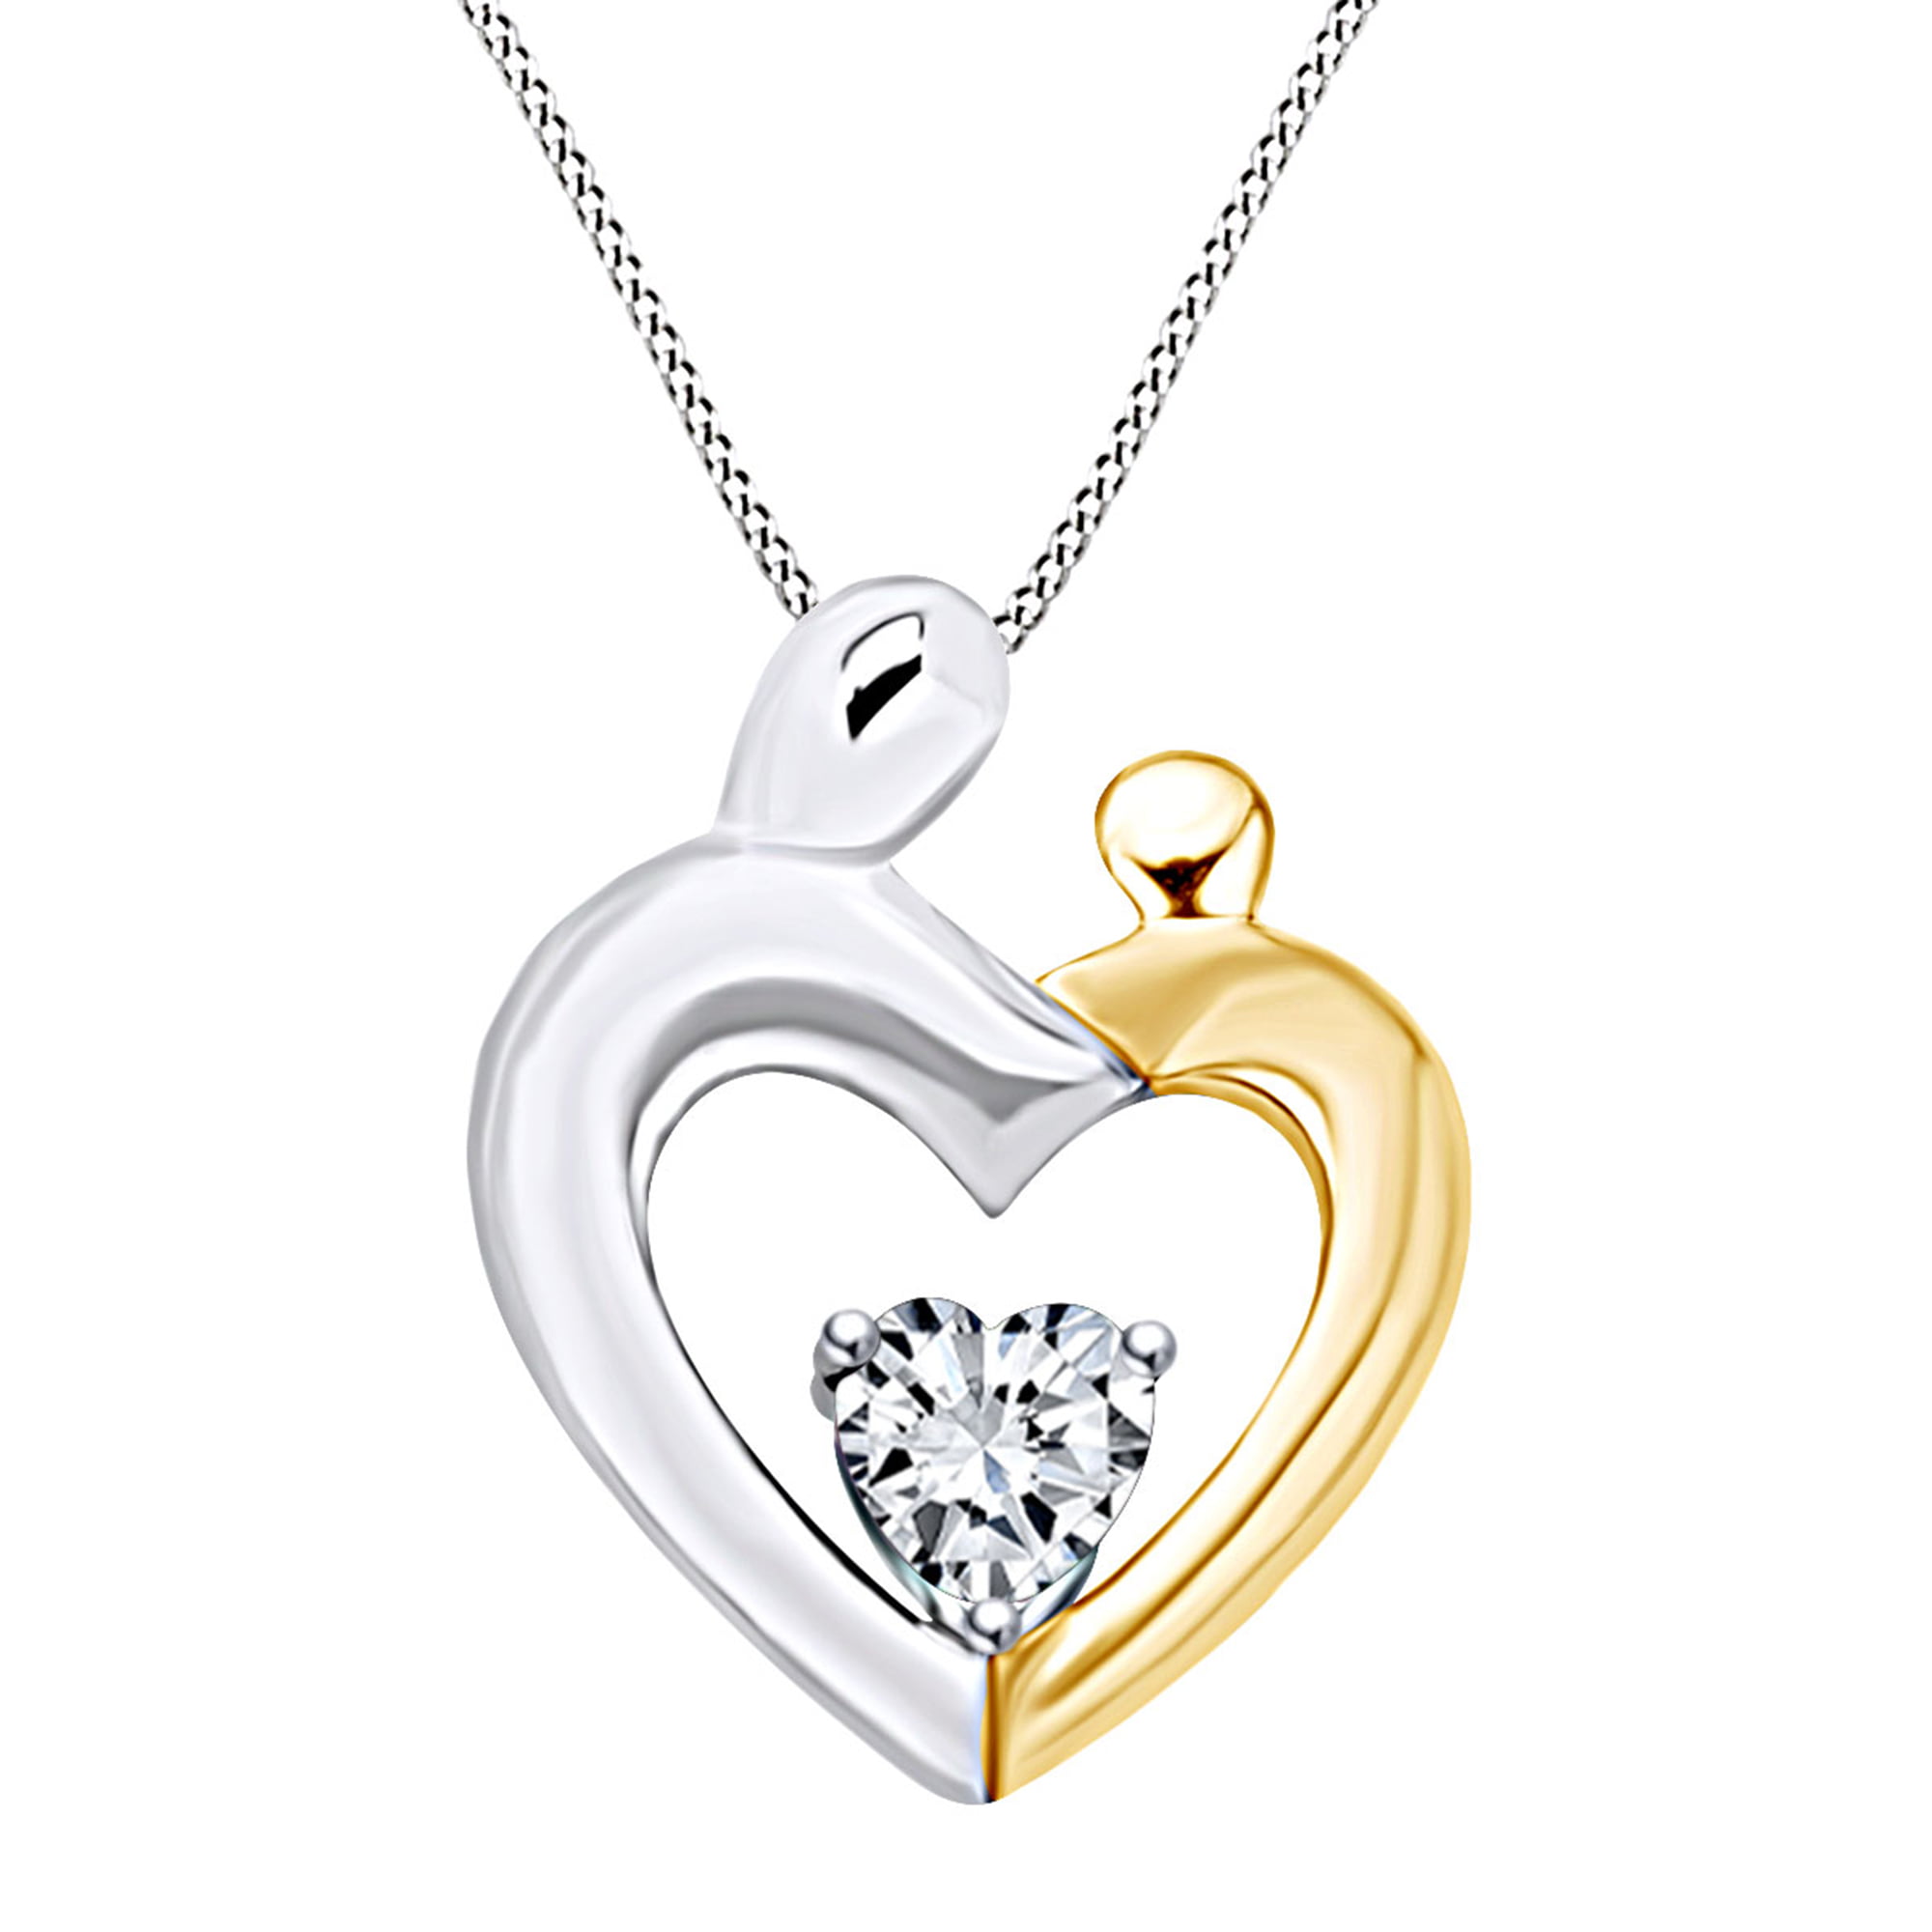 Jewel Zone US Mother's Day Jewelry Gift Heart Cut White Cubic